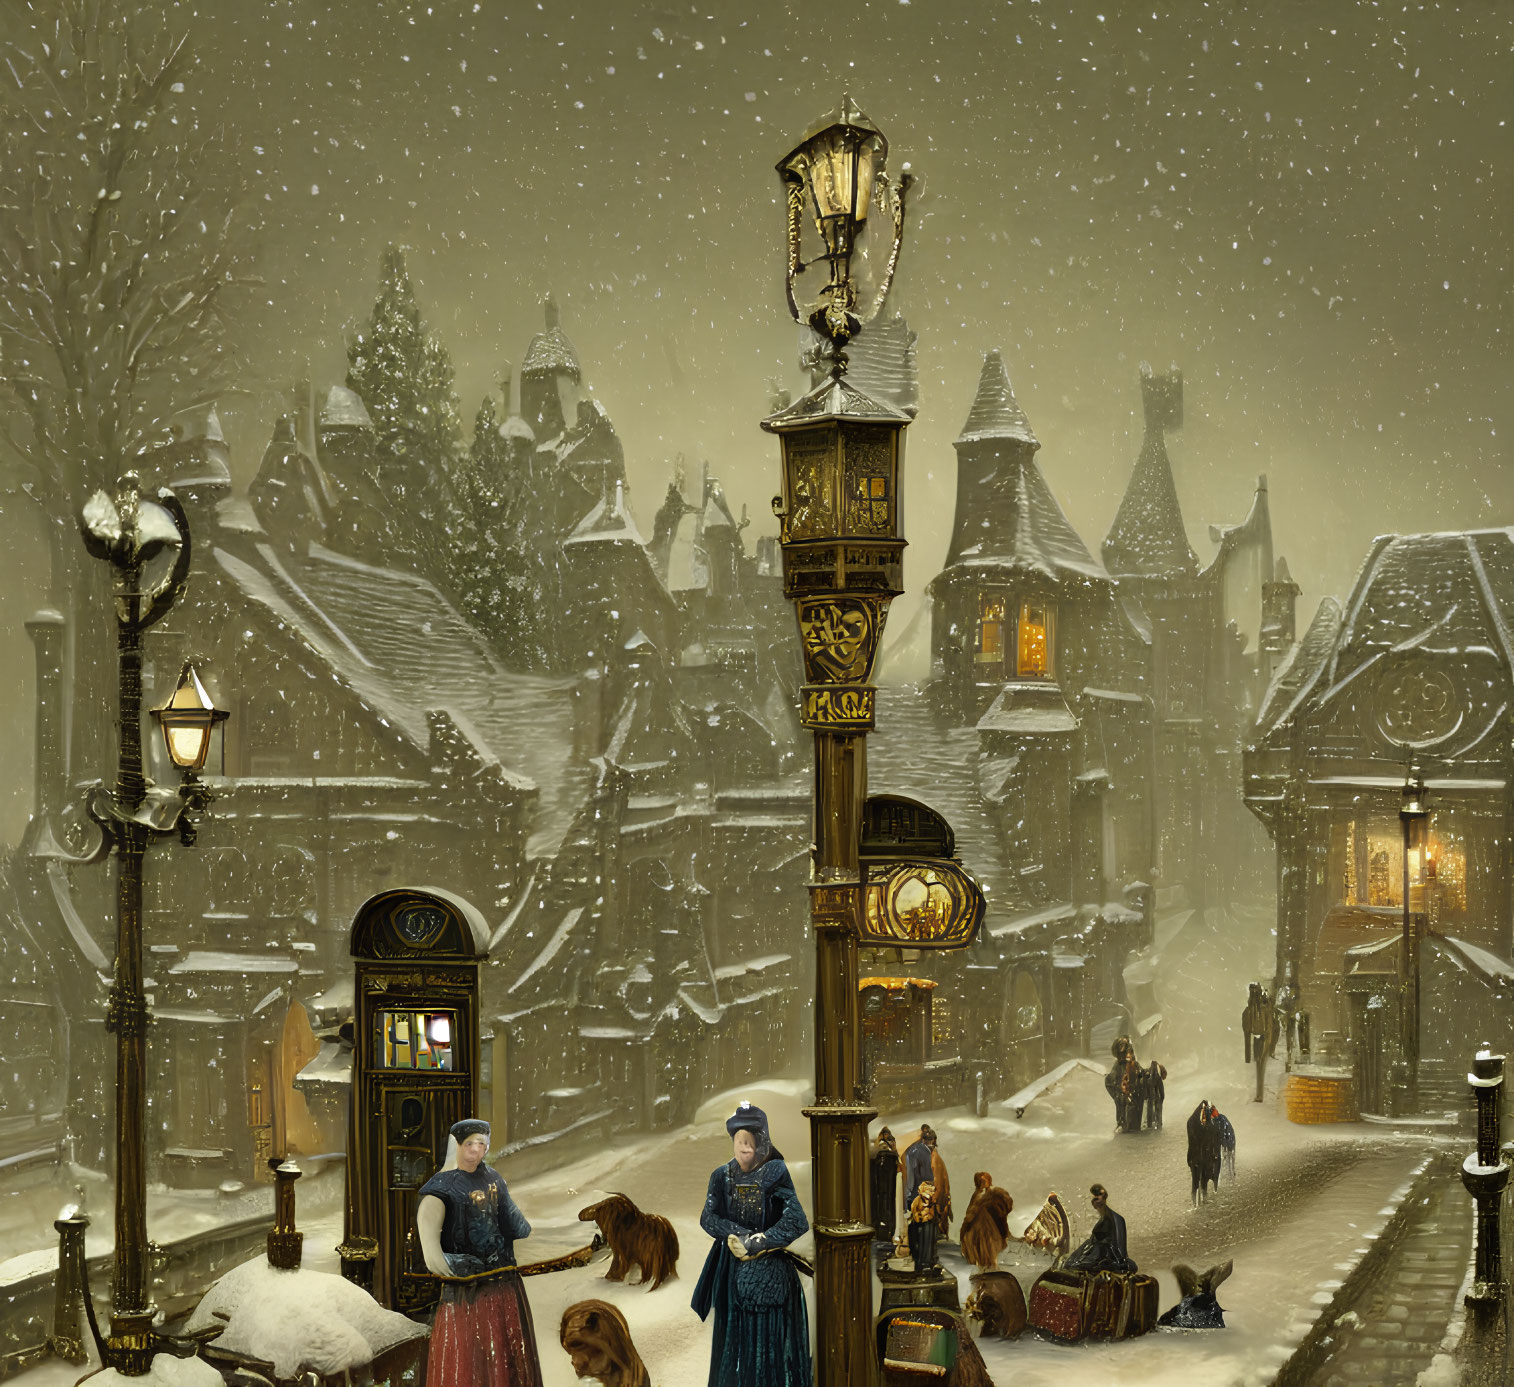 Victorian snowy street scene with period clothing, dog, lit lamps, and dusk sky